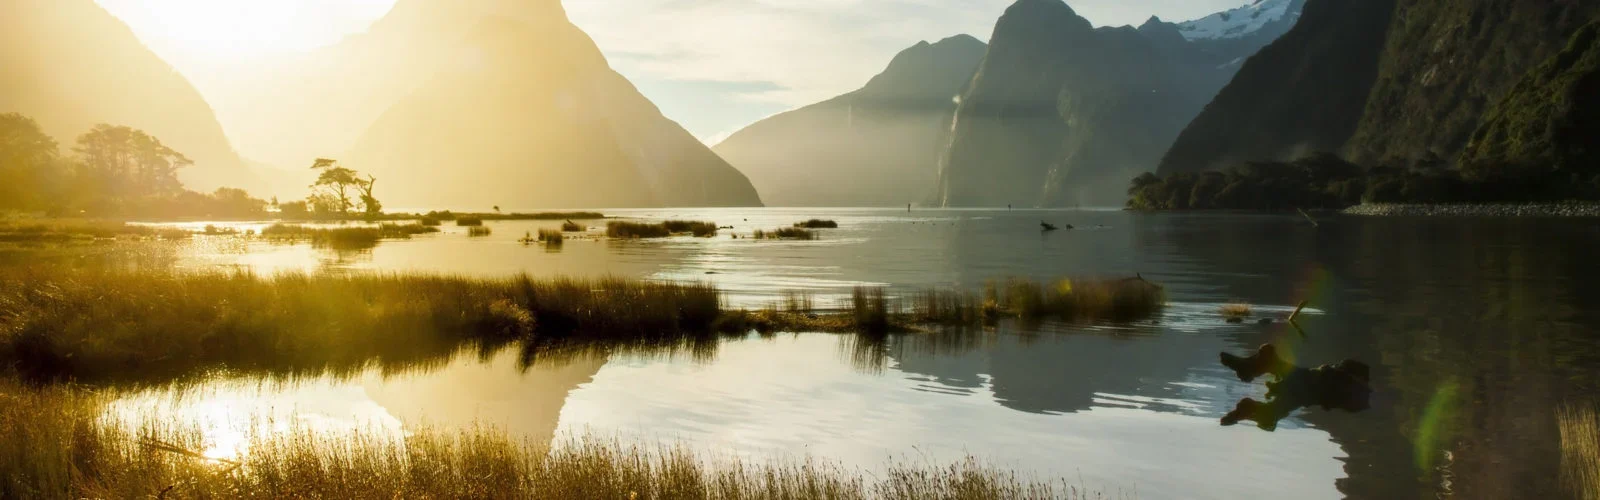 The sun setting over the Milford Sound